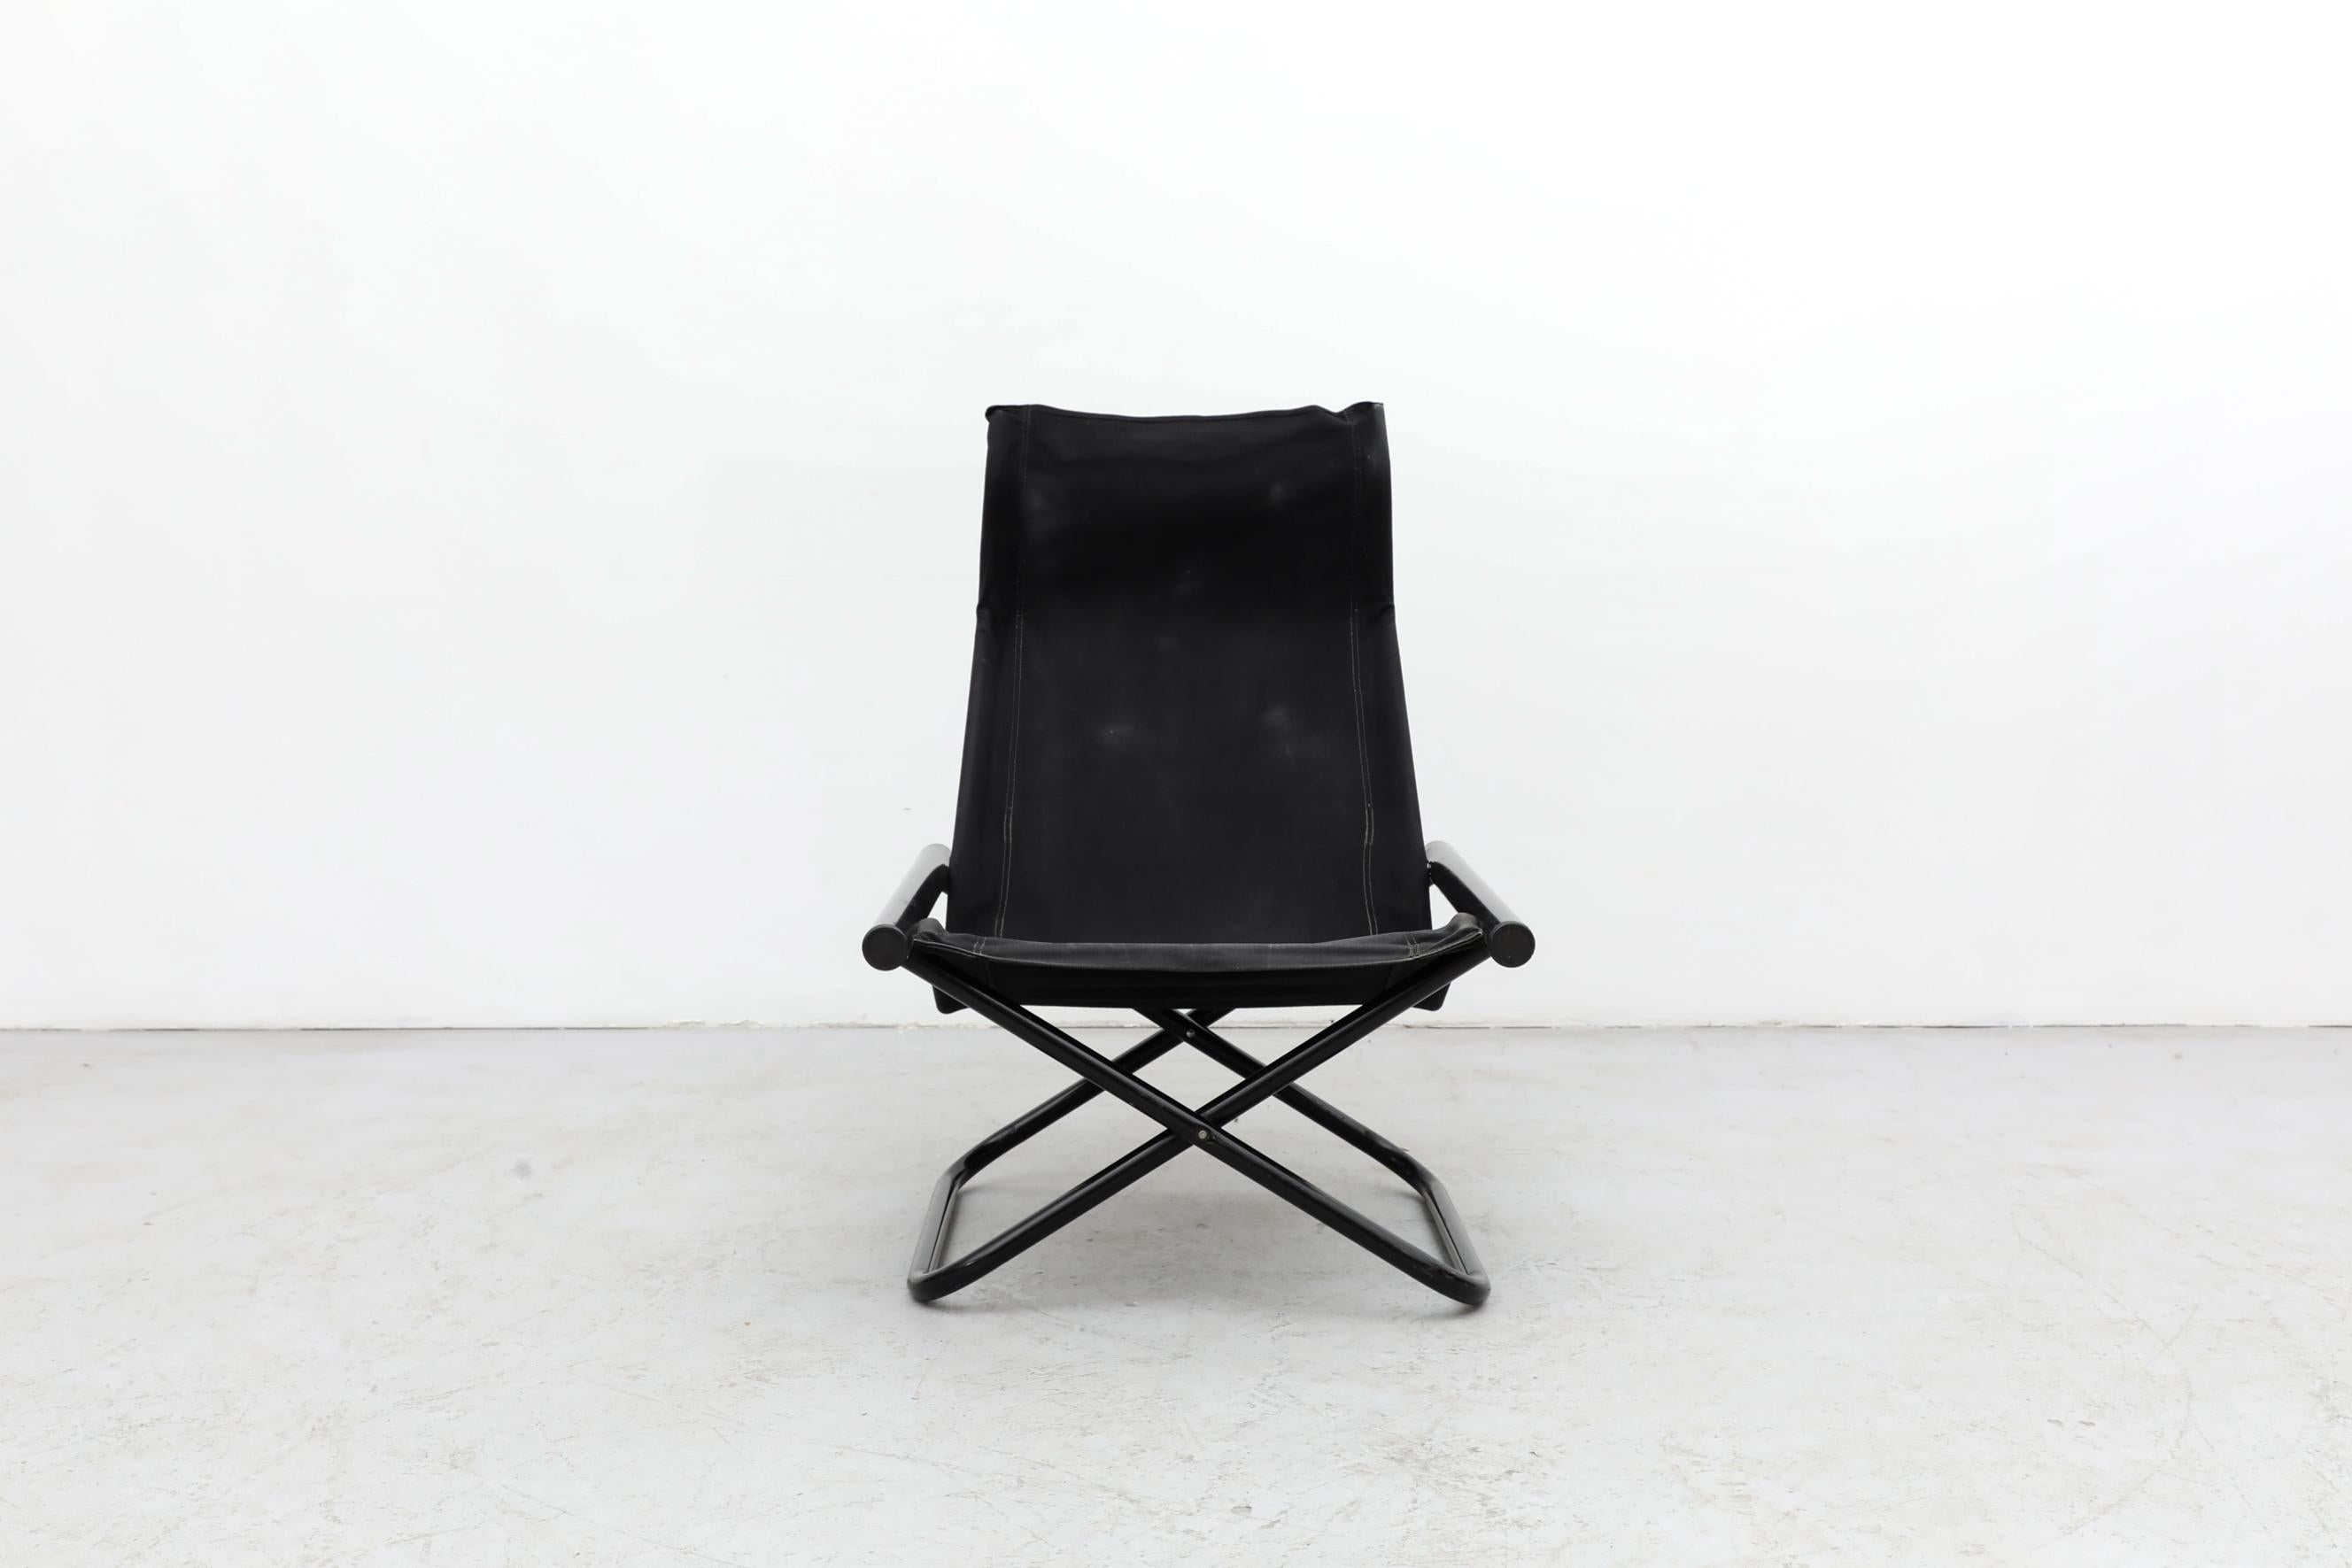 Inspired by the folding form of a traditional director's chair and the simplicity and materials of Danish modern design, this folding chair was designed by Japanese designer Takeshi Nii in 1958. It has round black lacquered armrests, a tubular frame